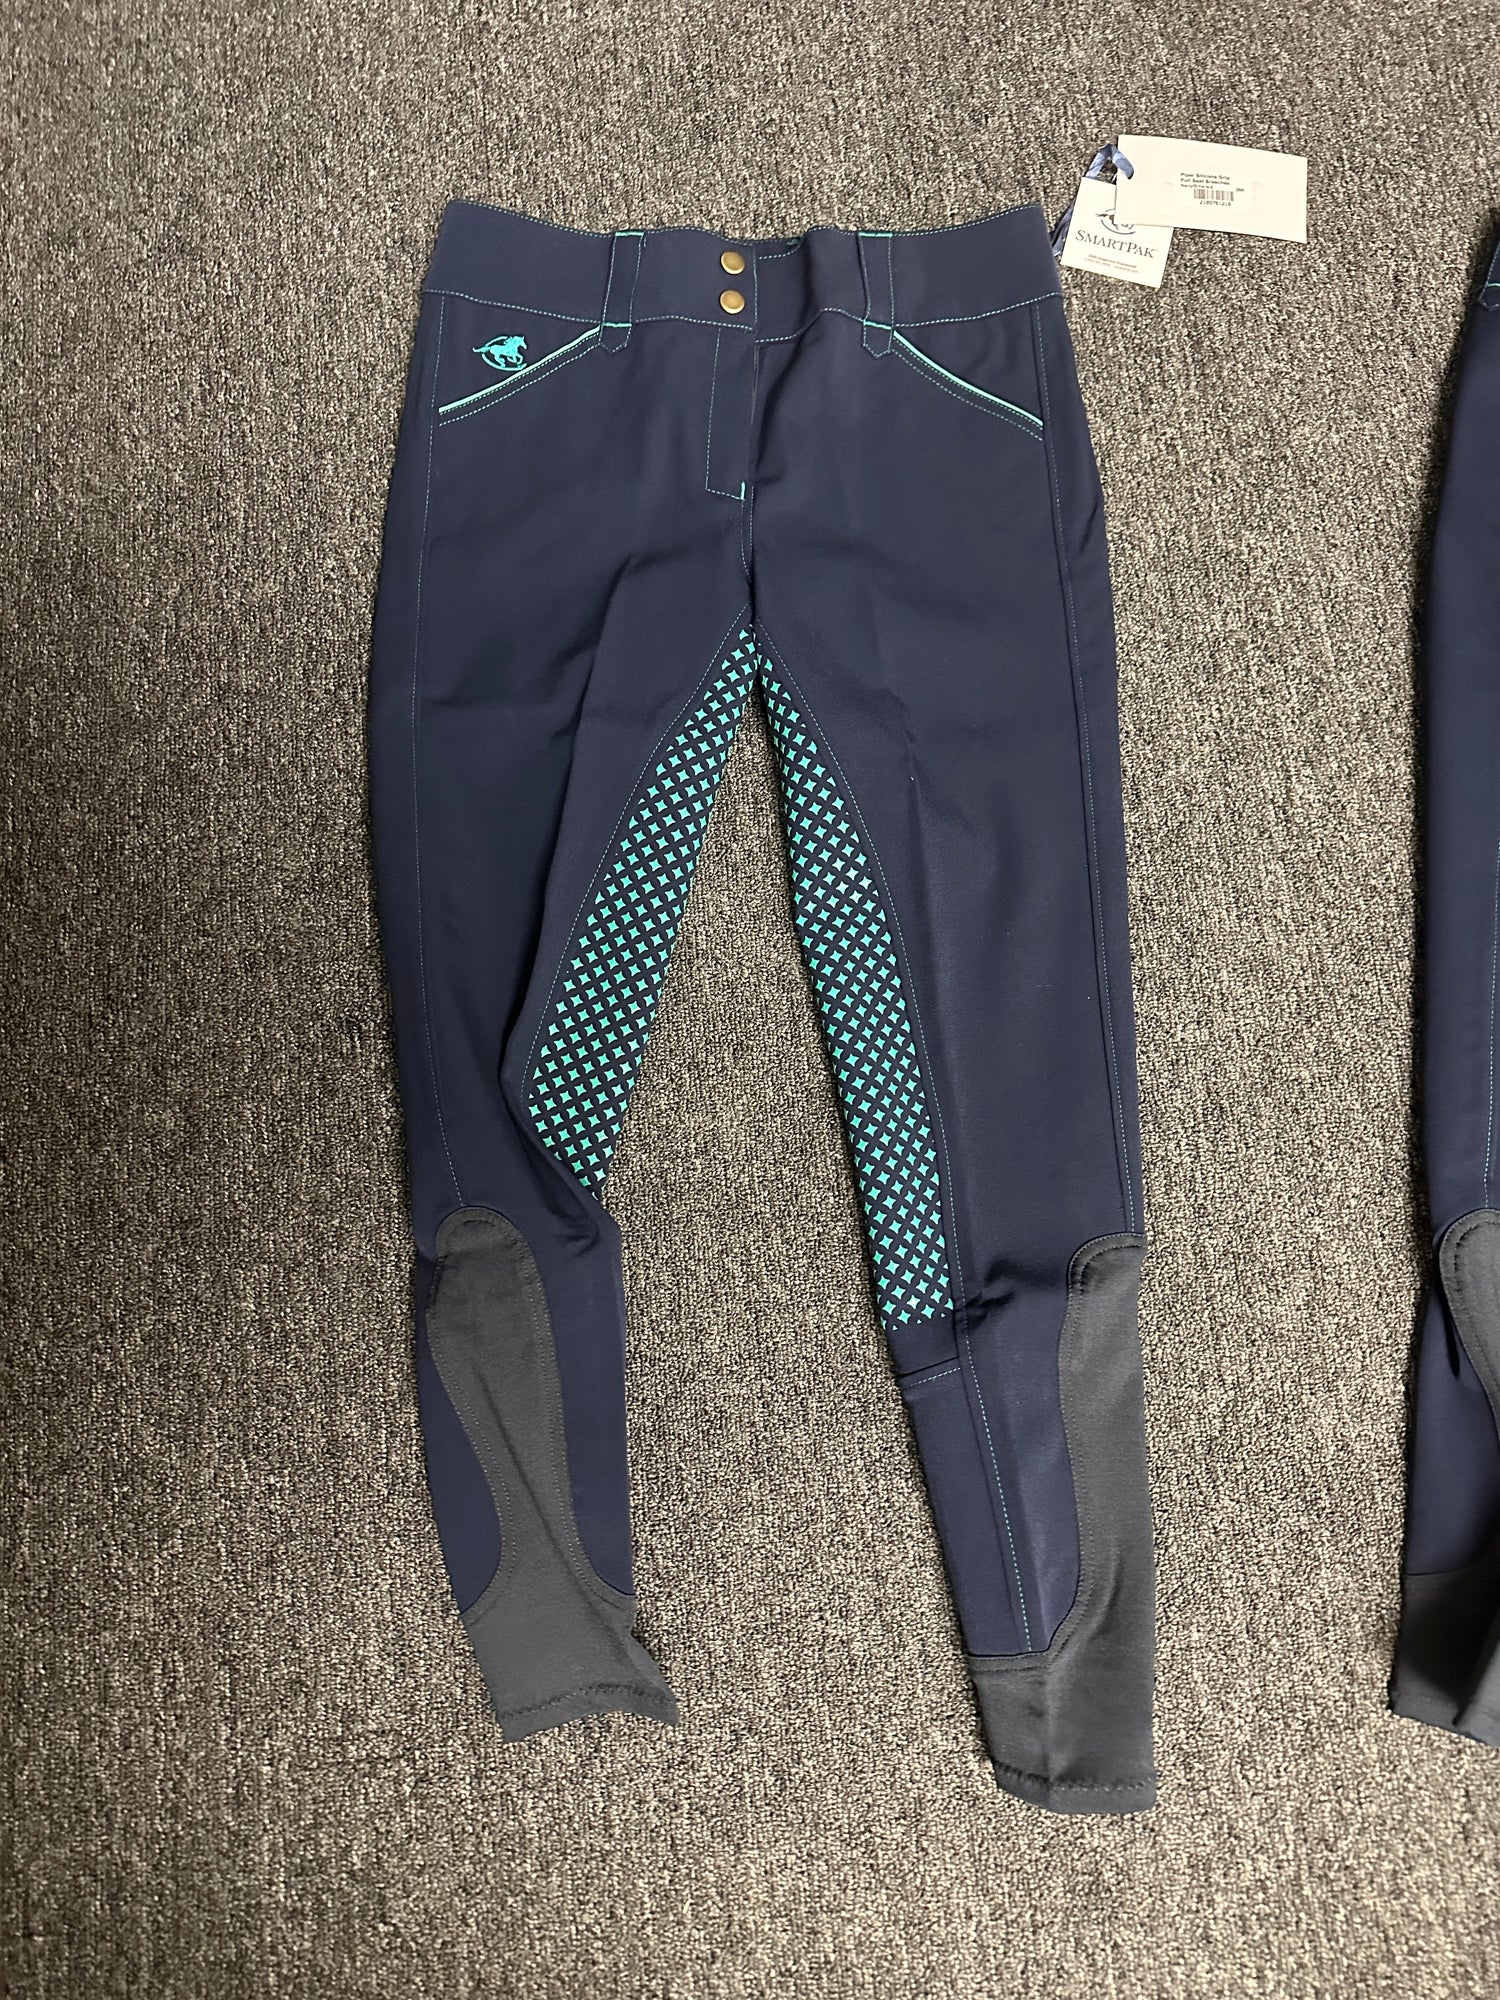 Women's Piper Breeches Navy with Emerald Silicone Full Seat